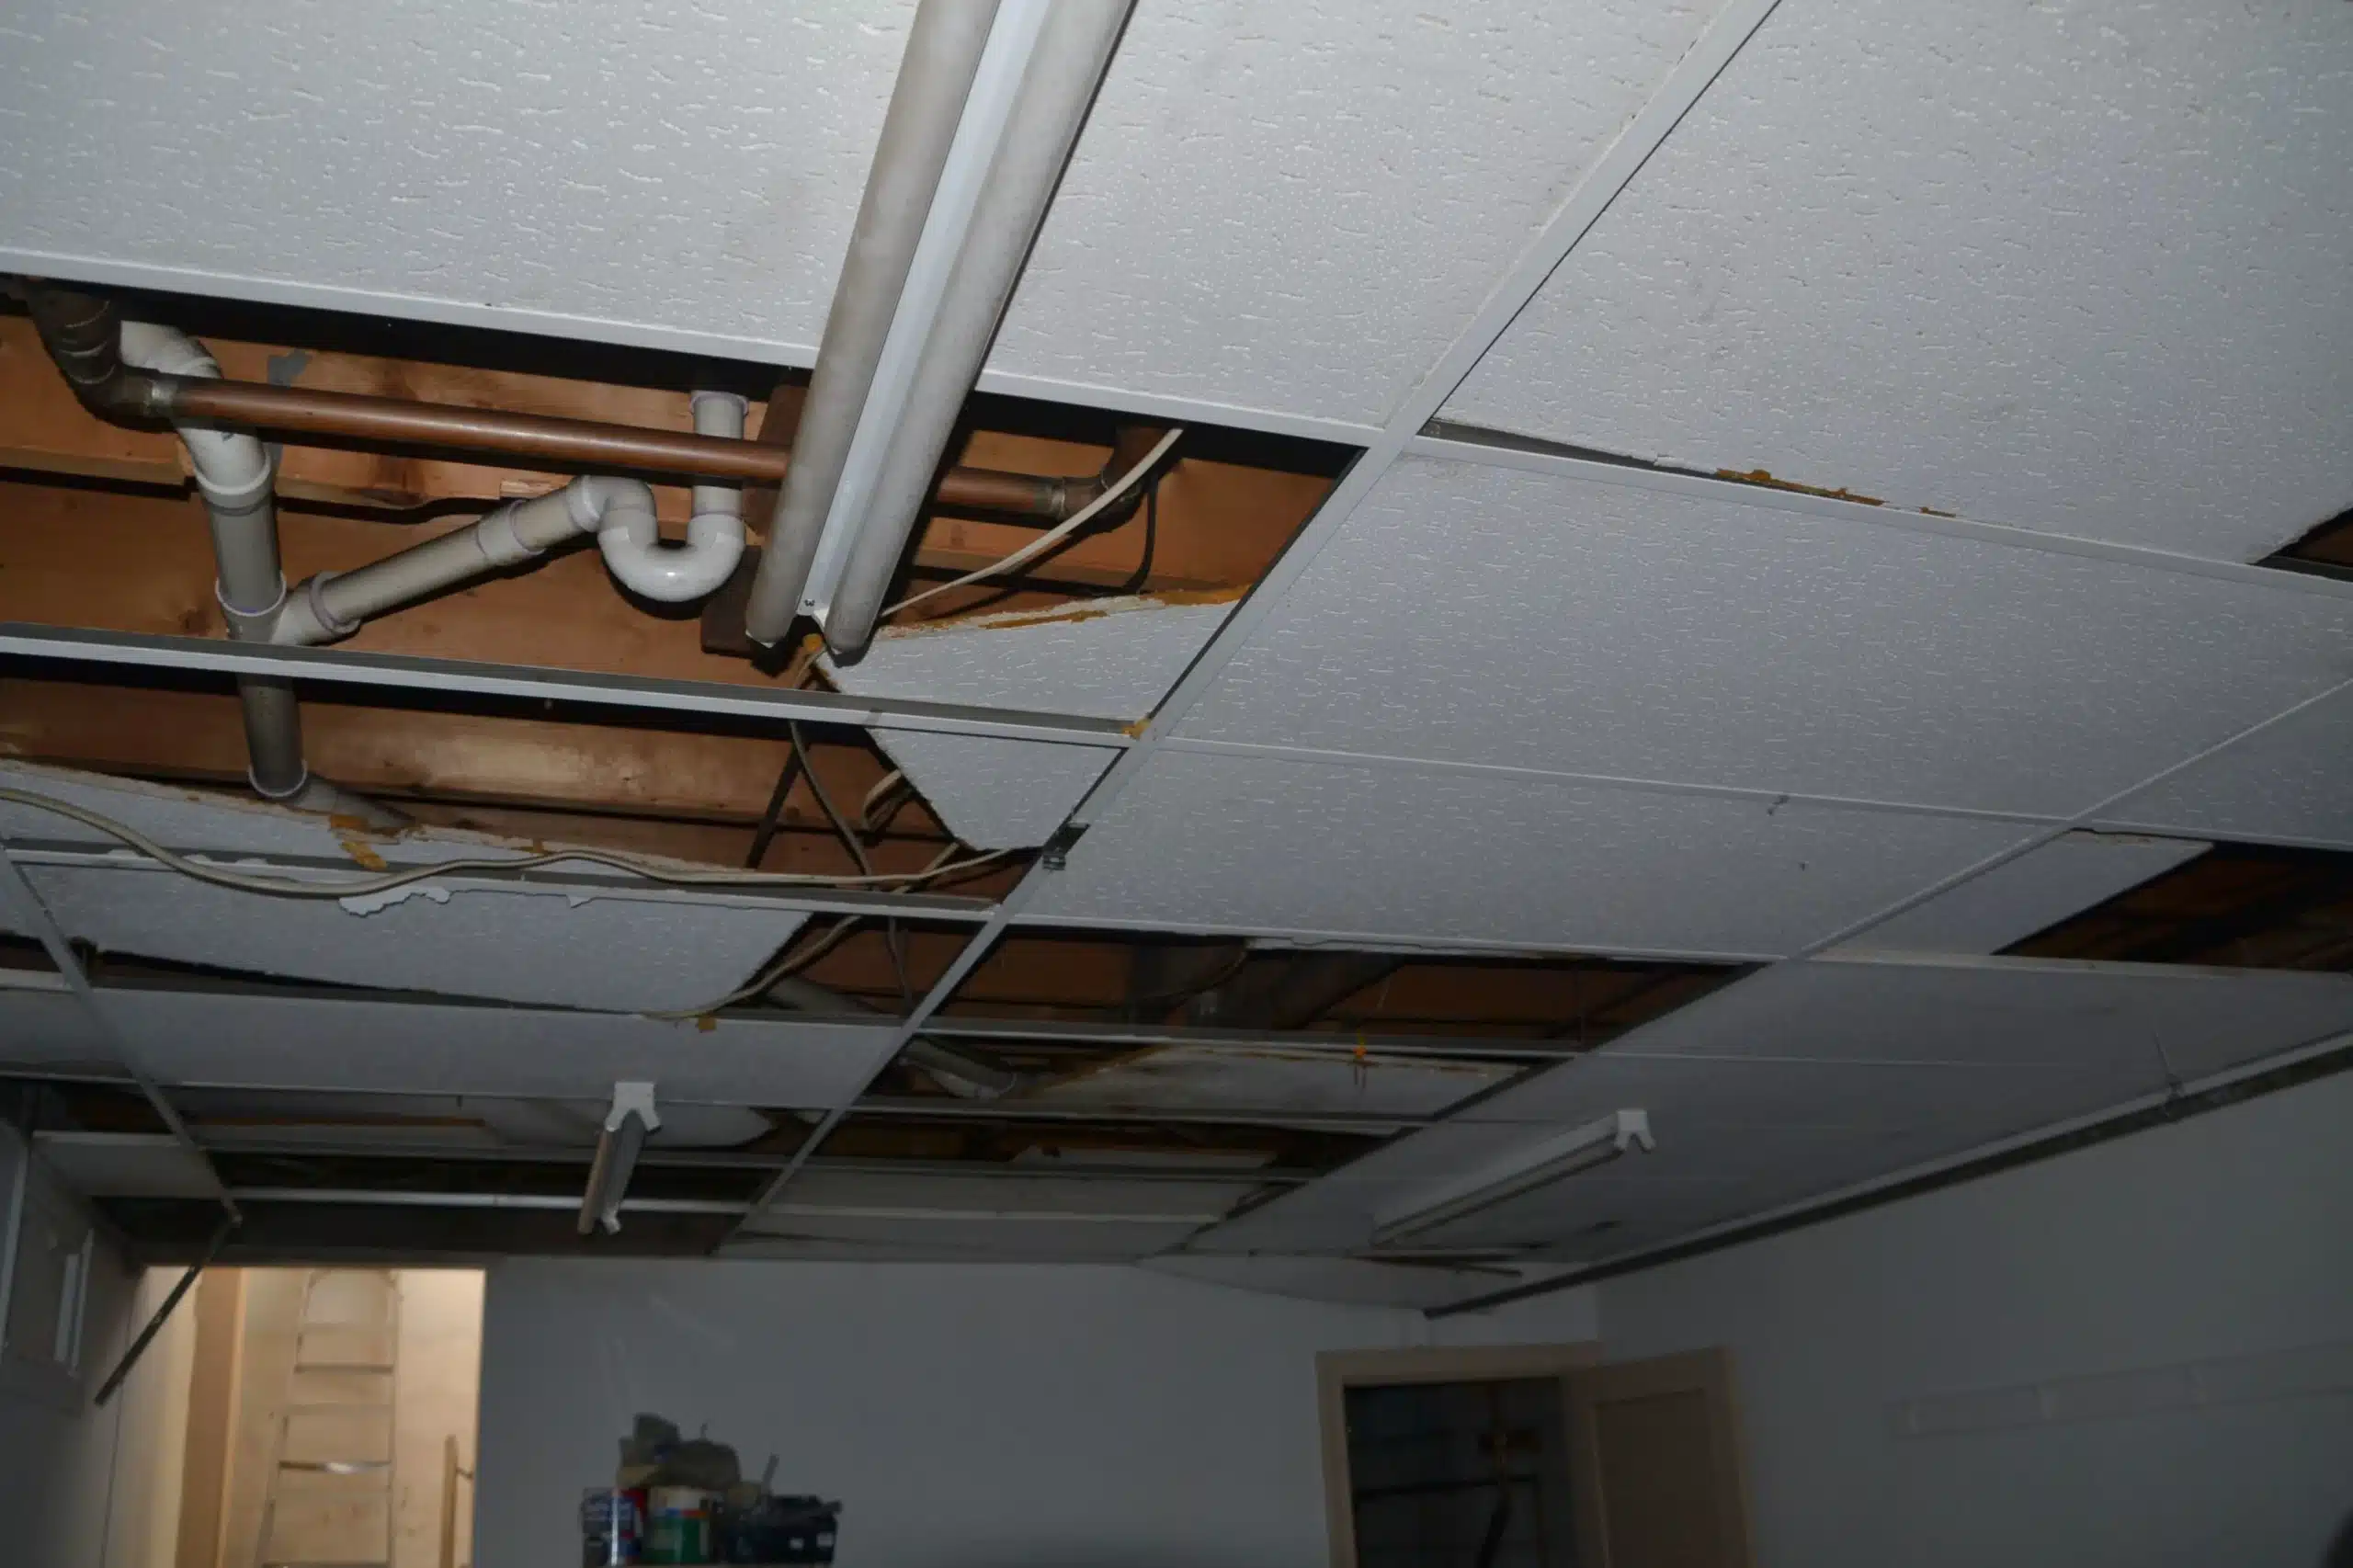 Should You File a Homeowners Insurance Claim for Water Damage?